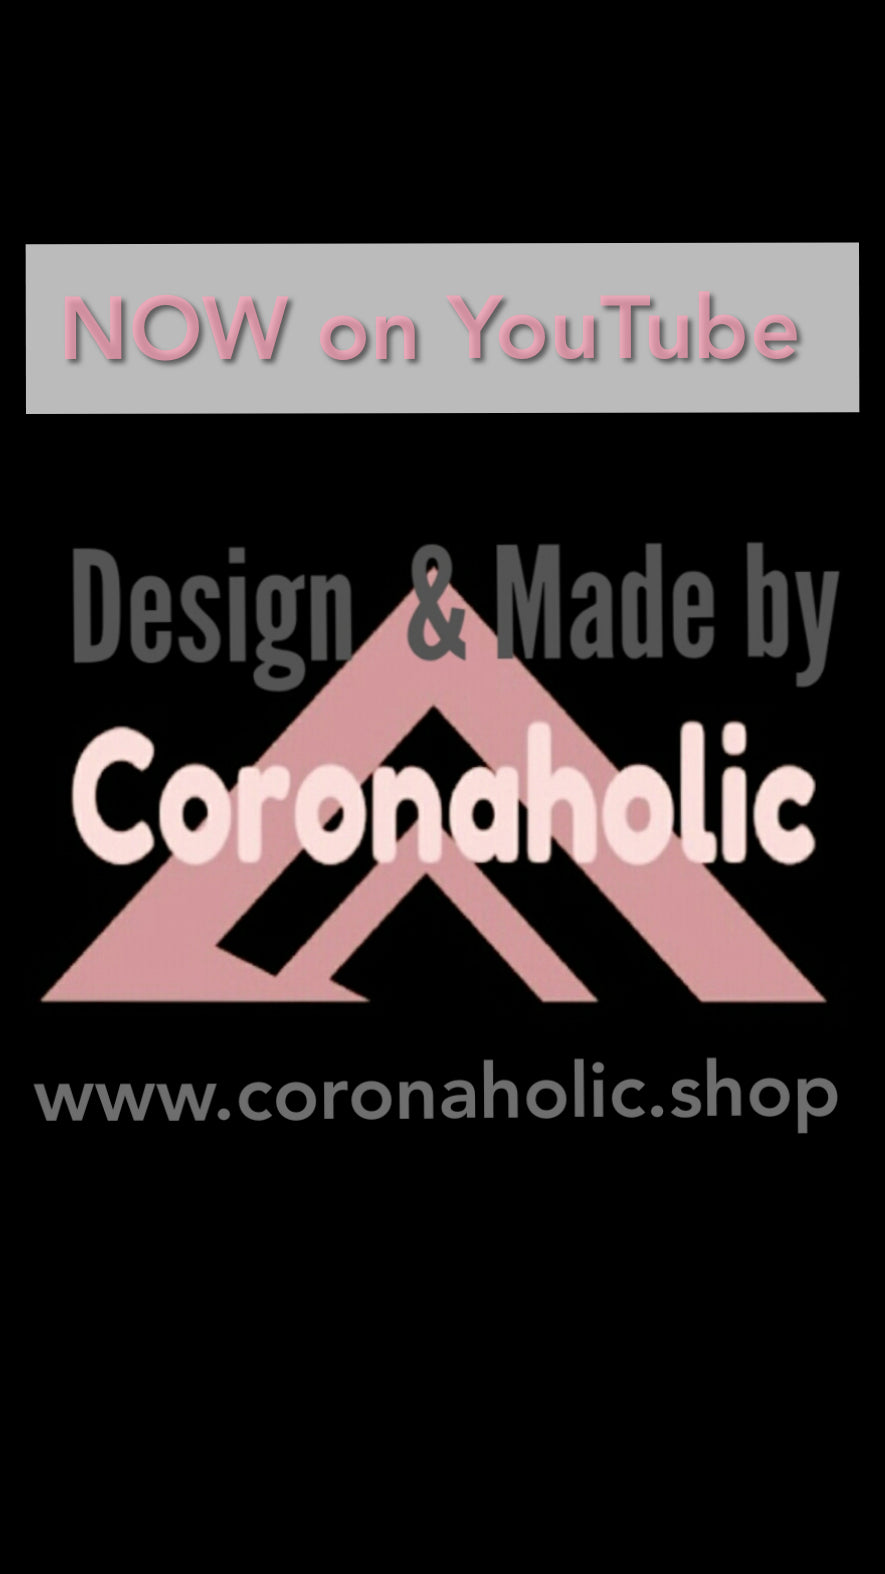 Our own "CORONAHOLIC Shop" YouTube Chanel